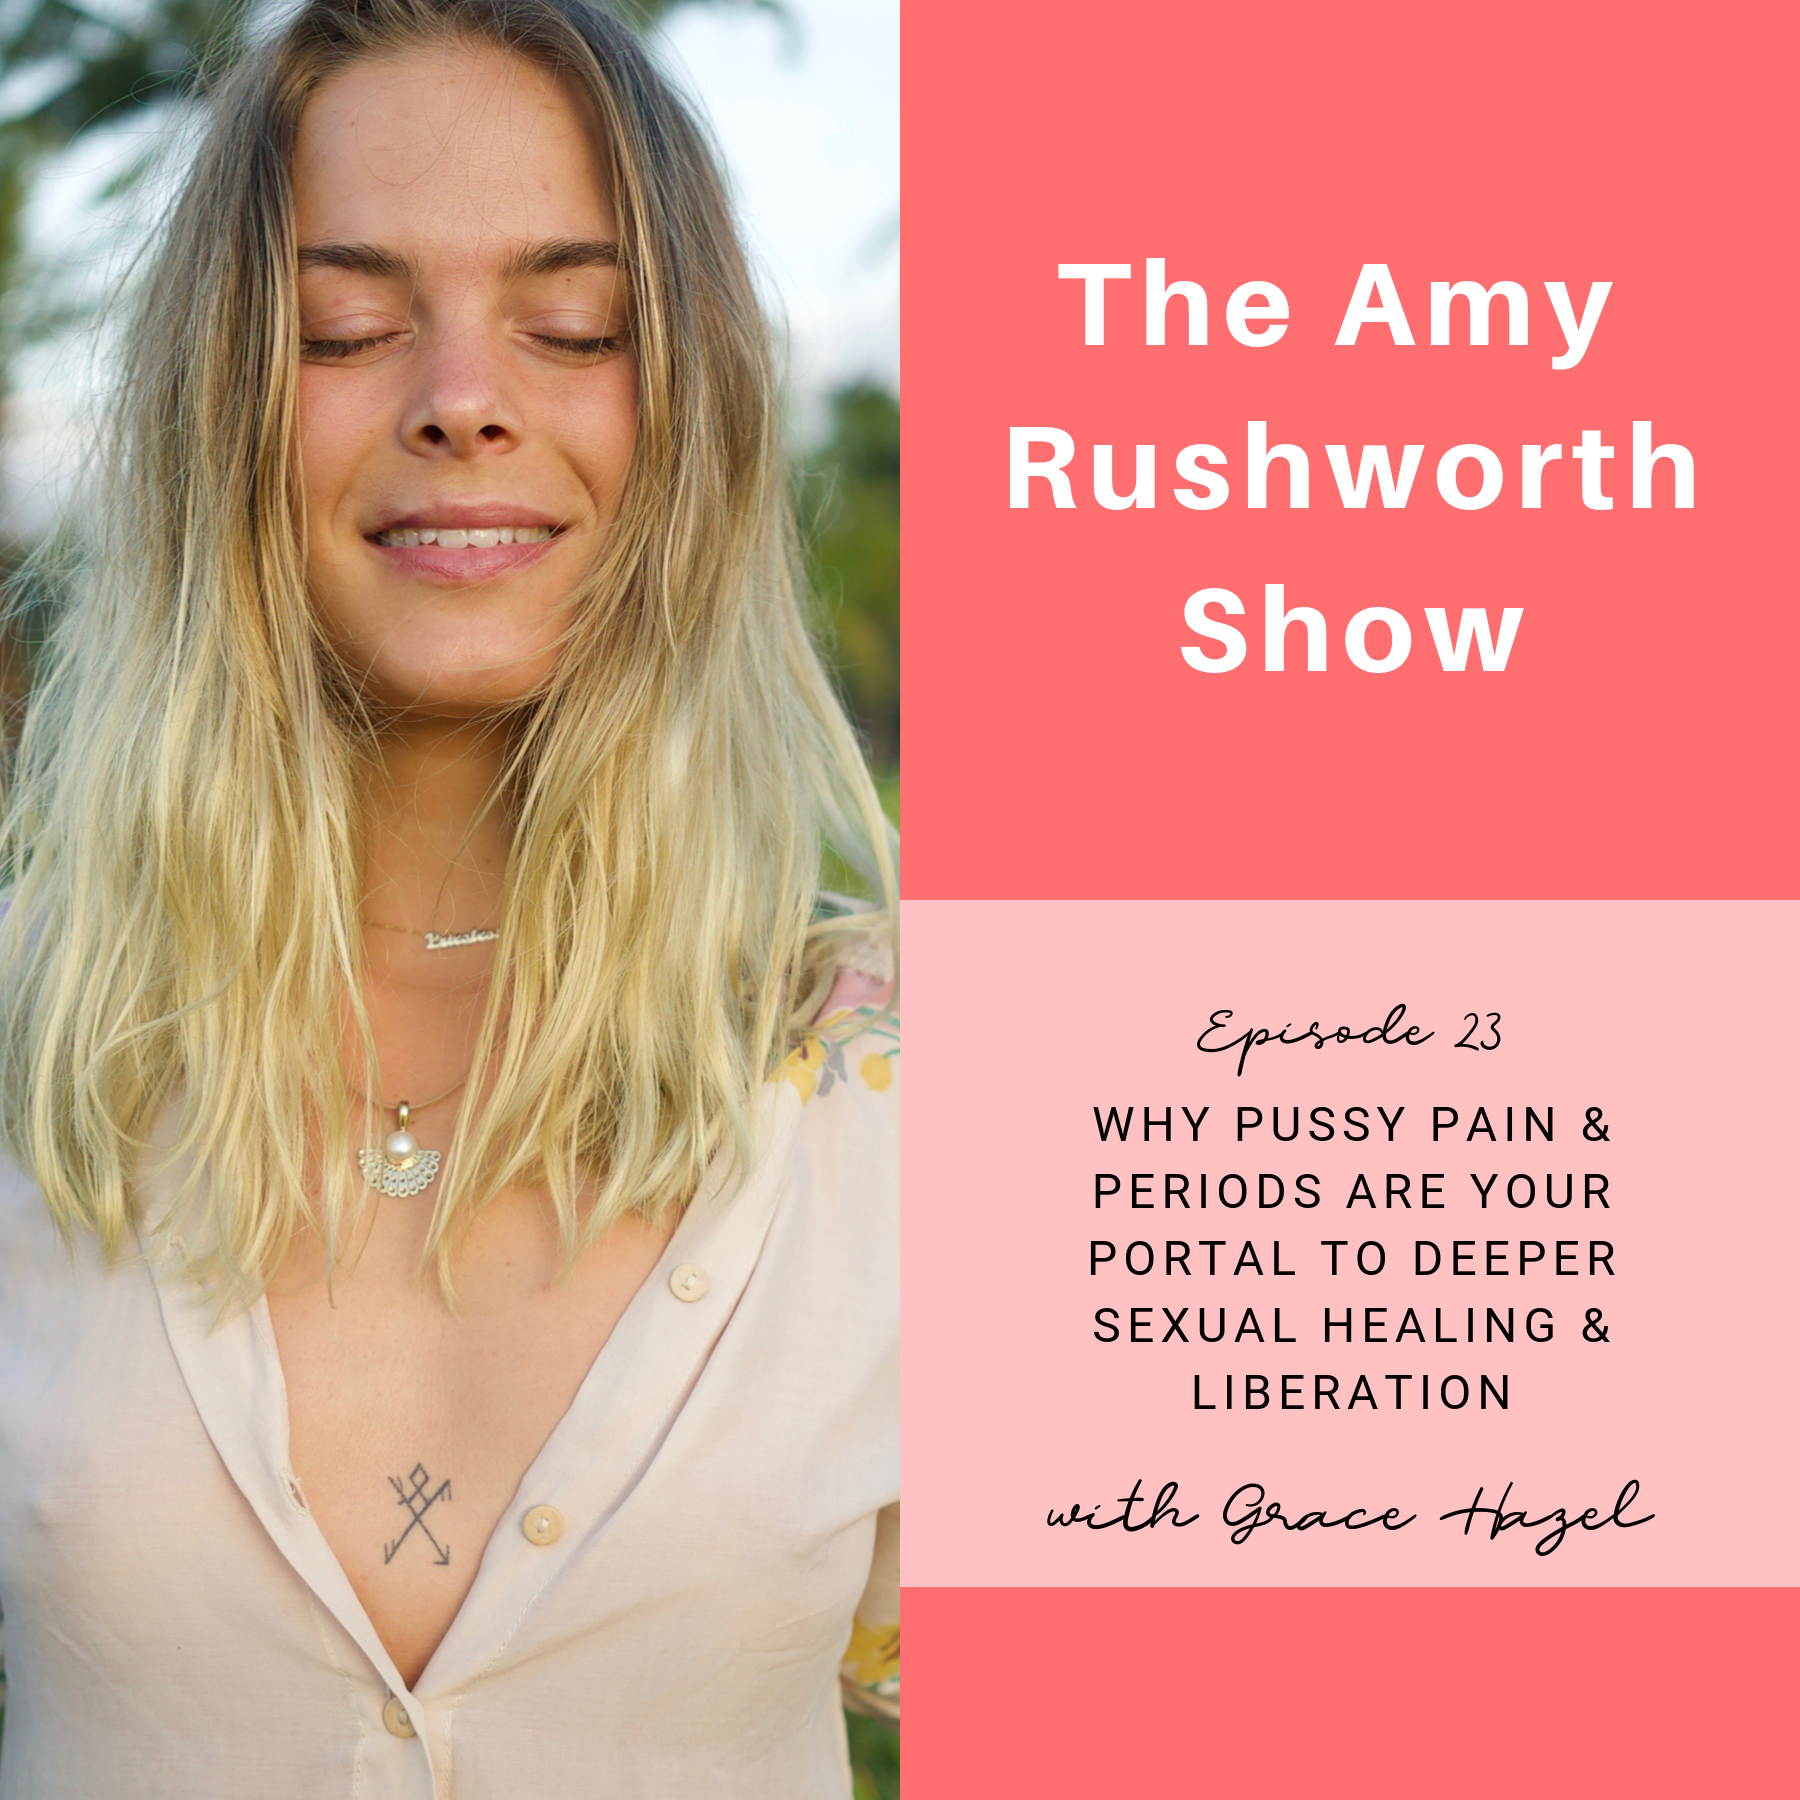 Episode 23: Why Pussy Pain & Periods are Your Portal To Deeper Sexual Healing & Liberation